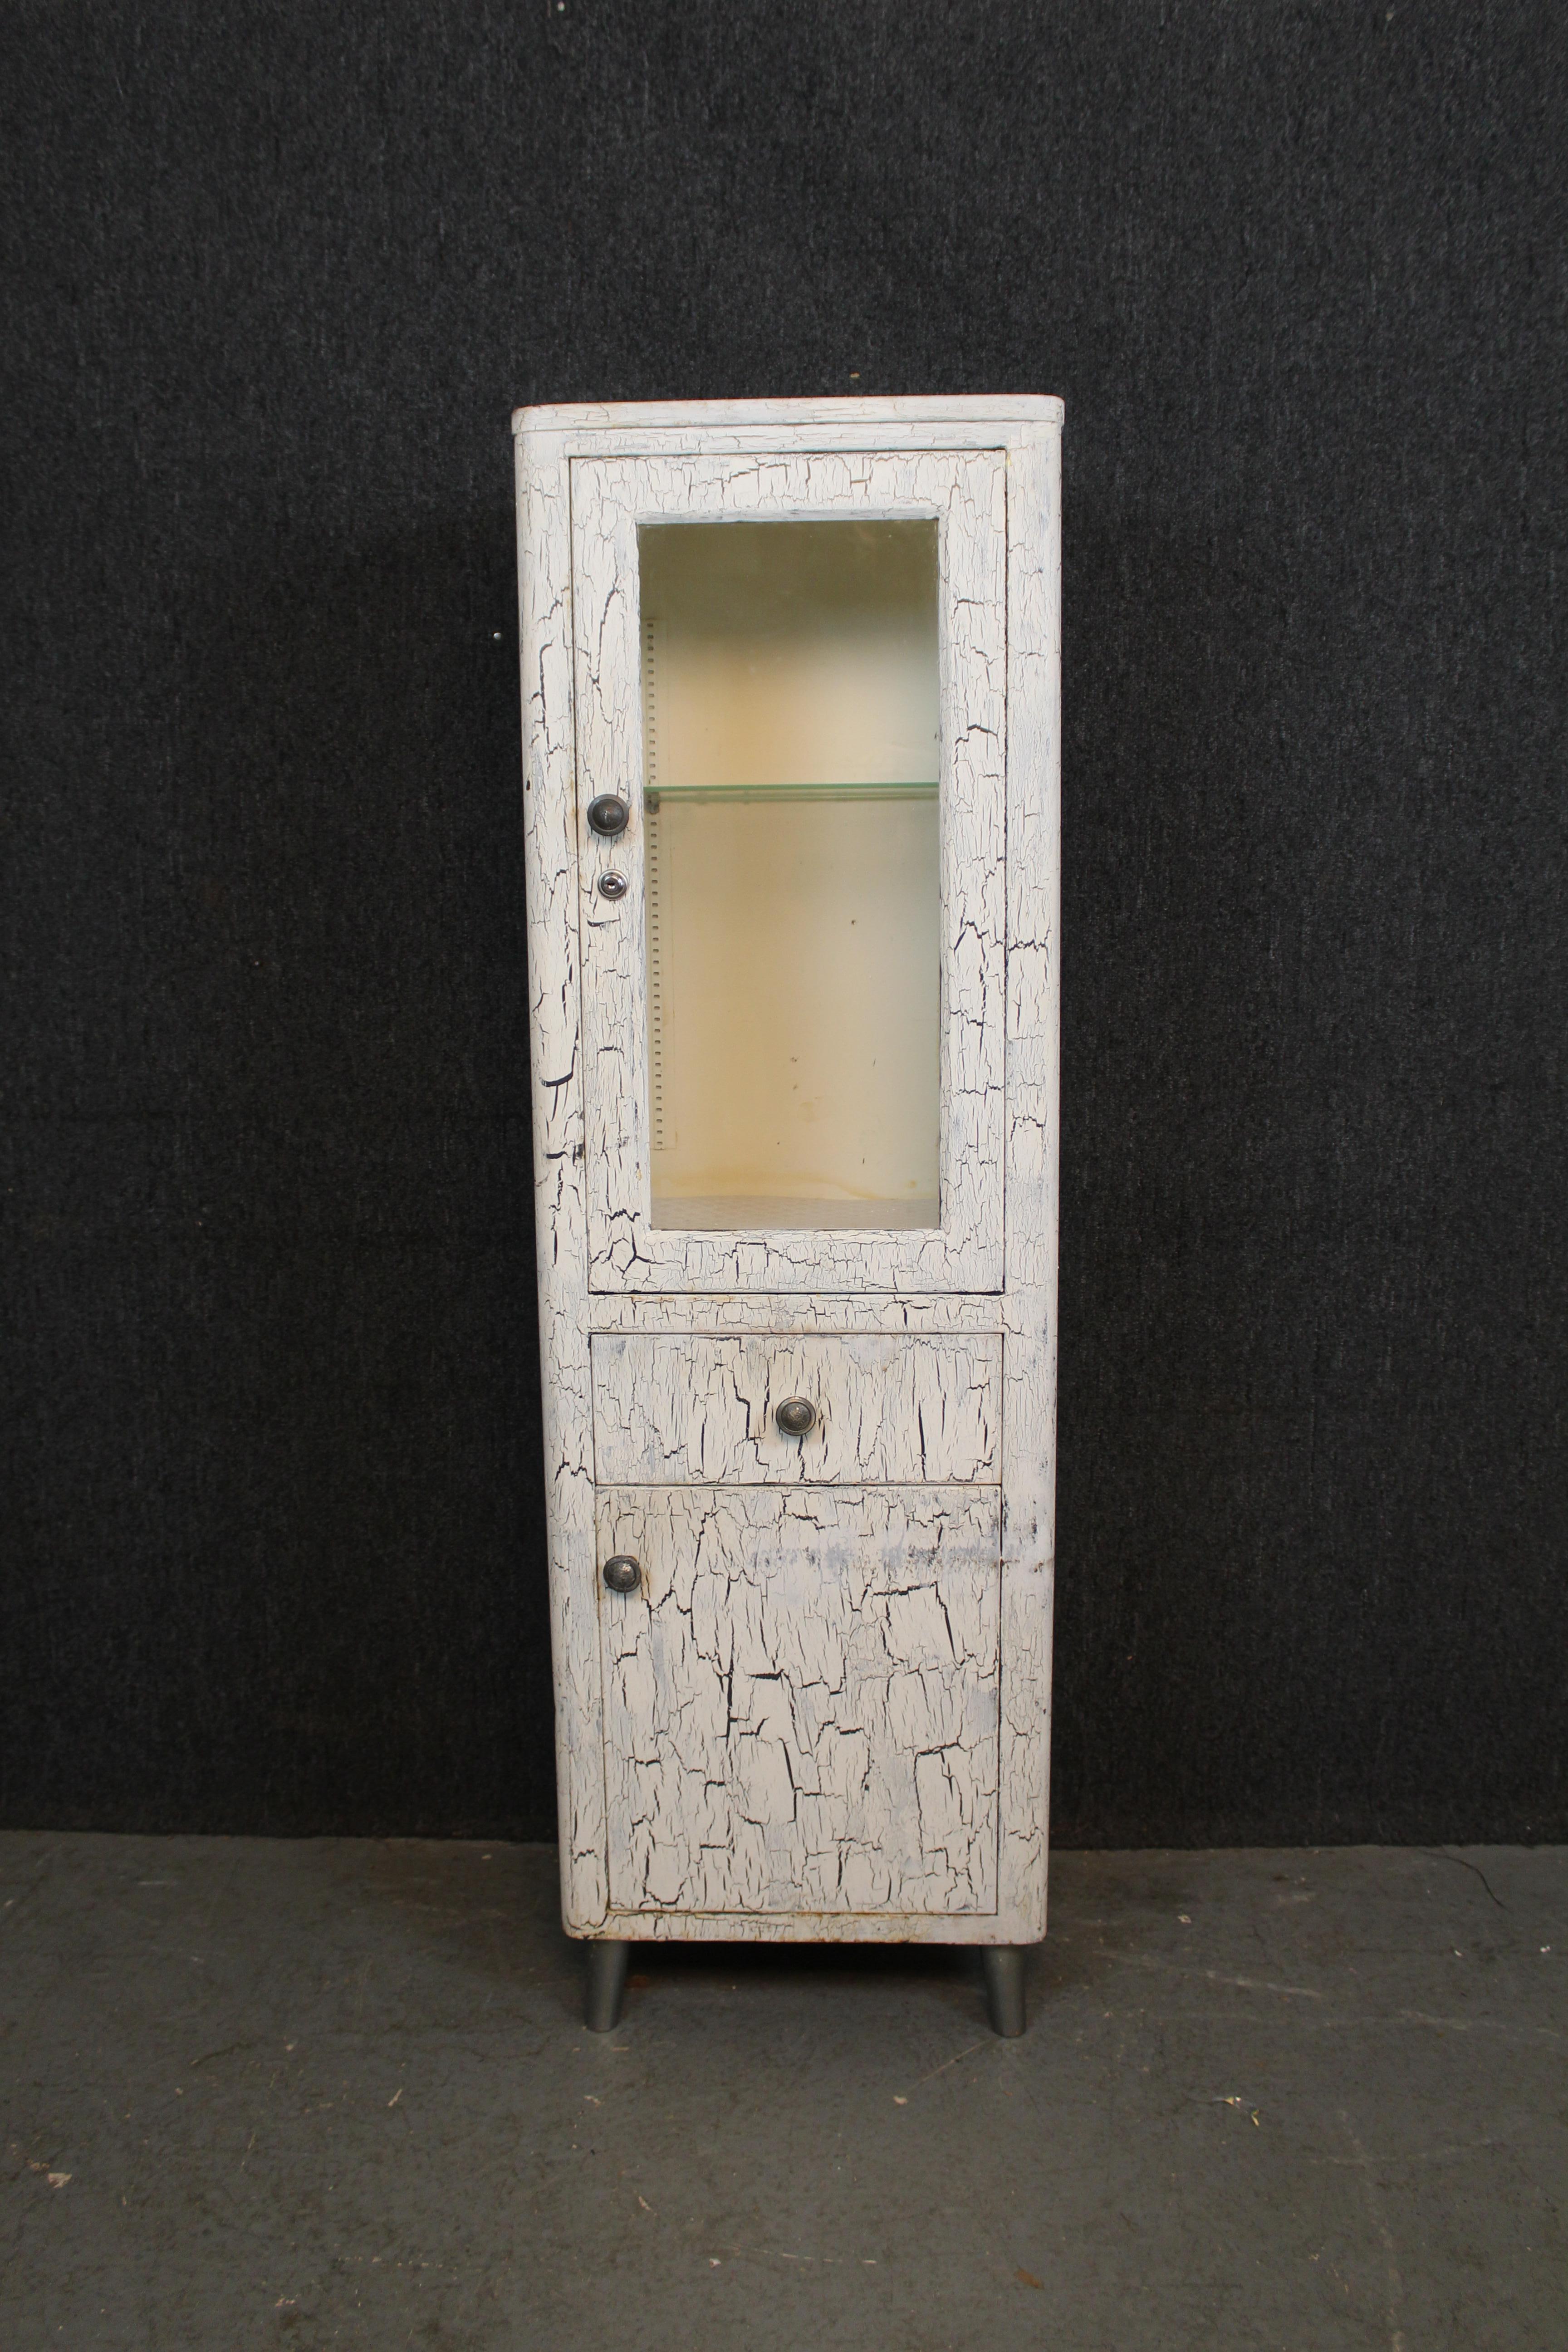 Don't miss out on this truly one of a kind antique industrial metal medical cabinet! Fully painted in a distressed white finish, giving it a fantastically unique, almost elephant-like appearance. Packed in a tidy 20